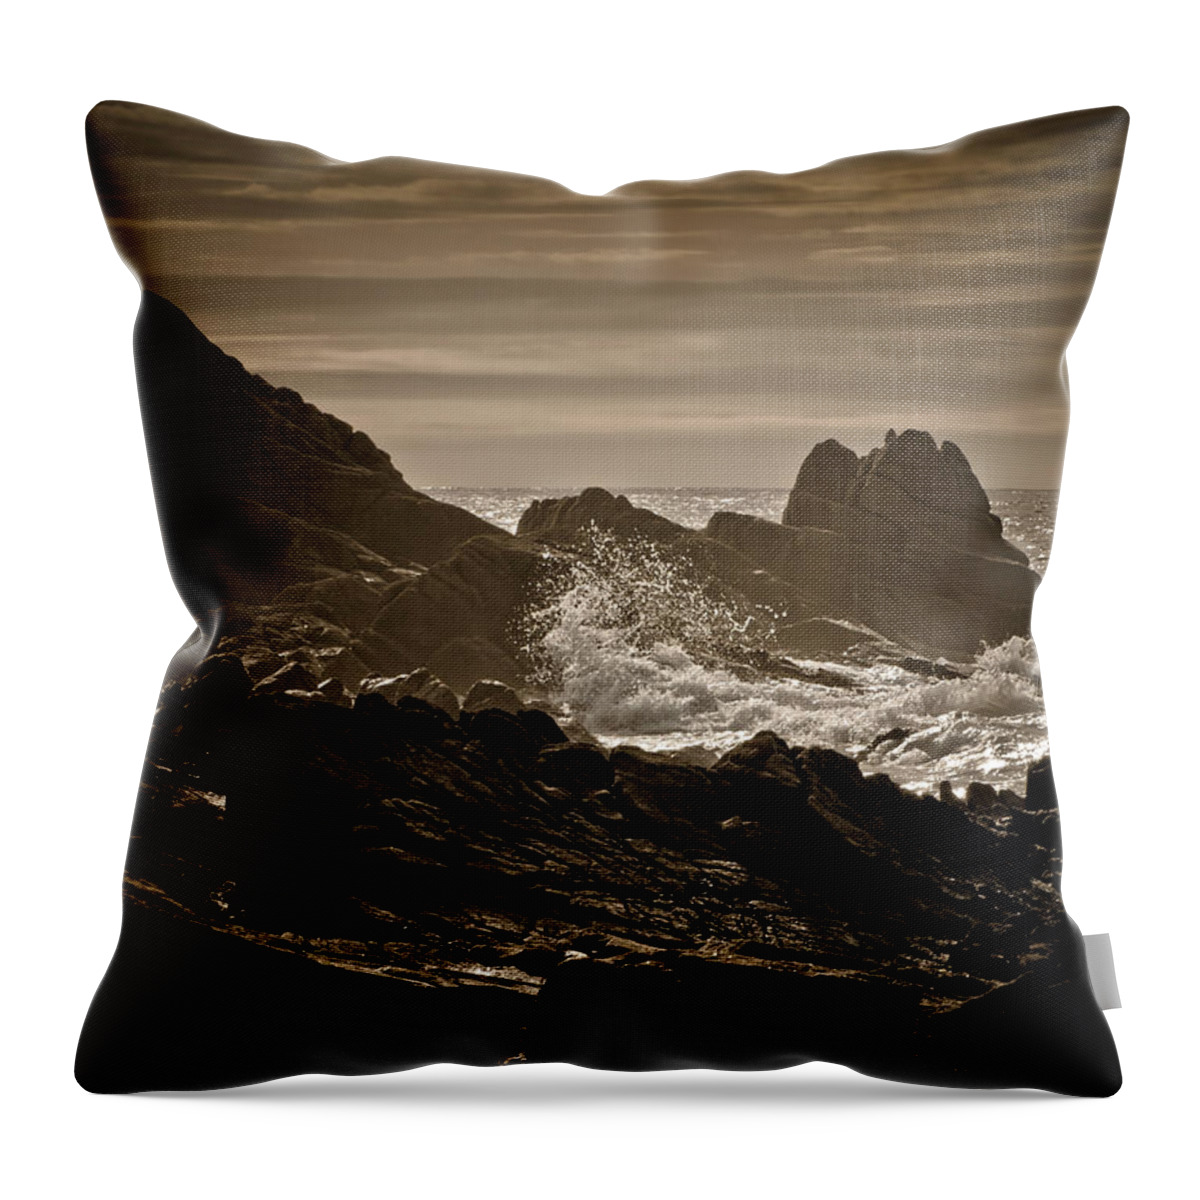 Spray Throw Pillow featuring the photograph Impact Of Wave On A Rocky Beach by Vfka